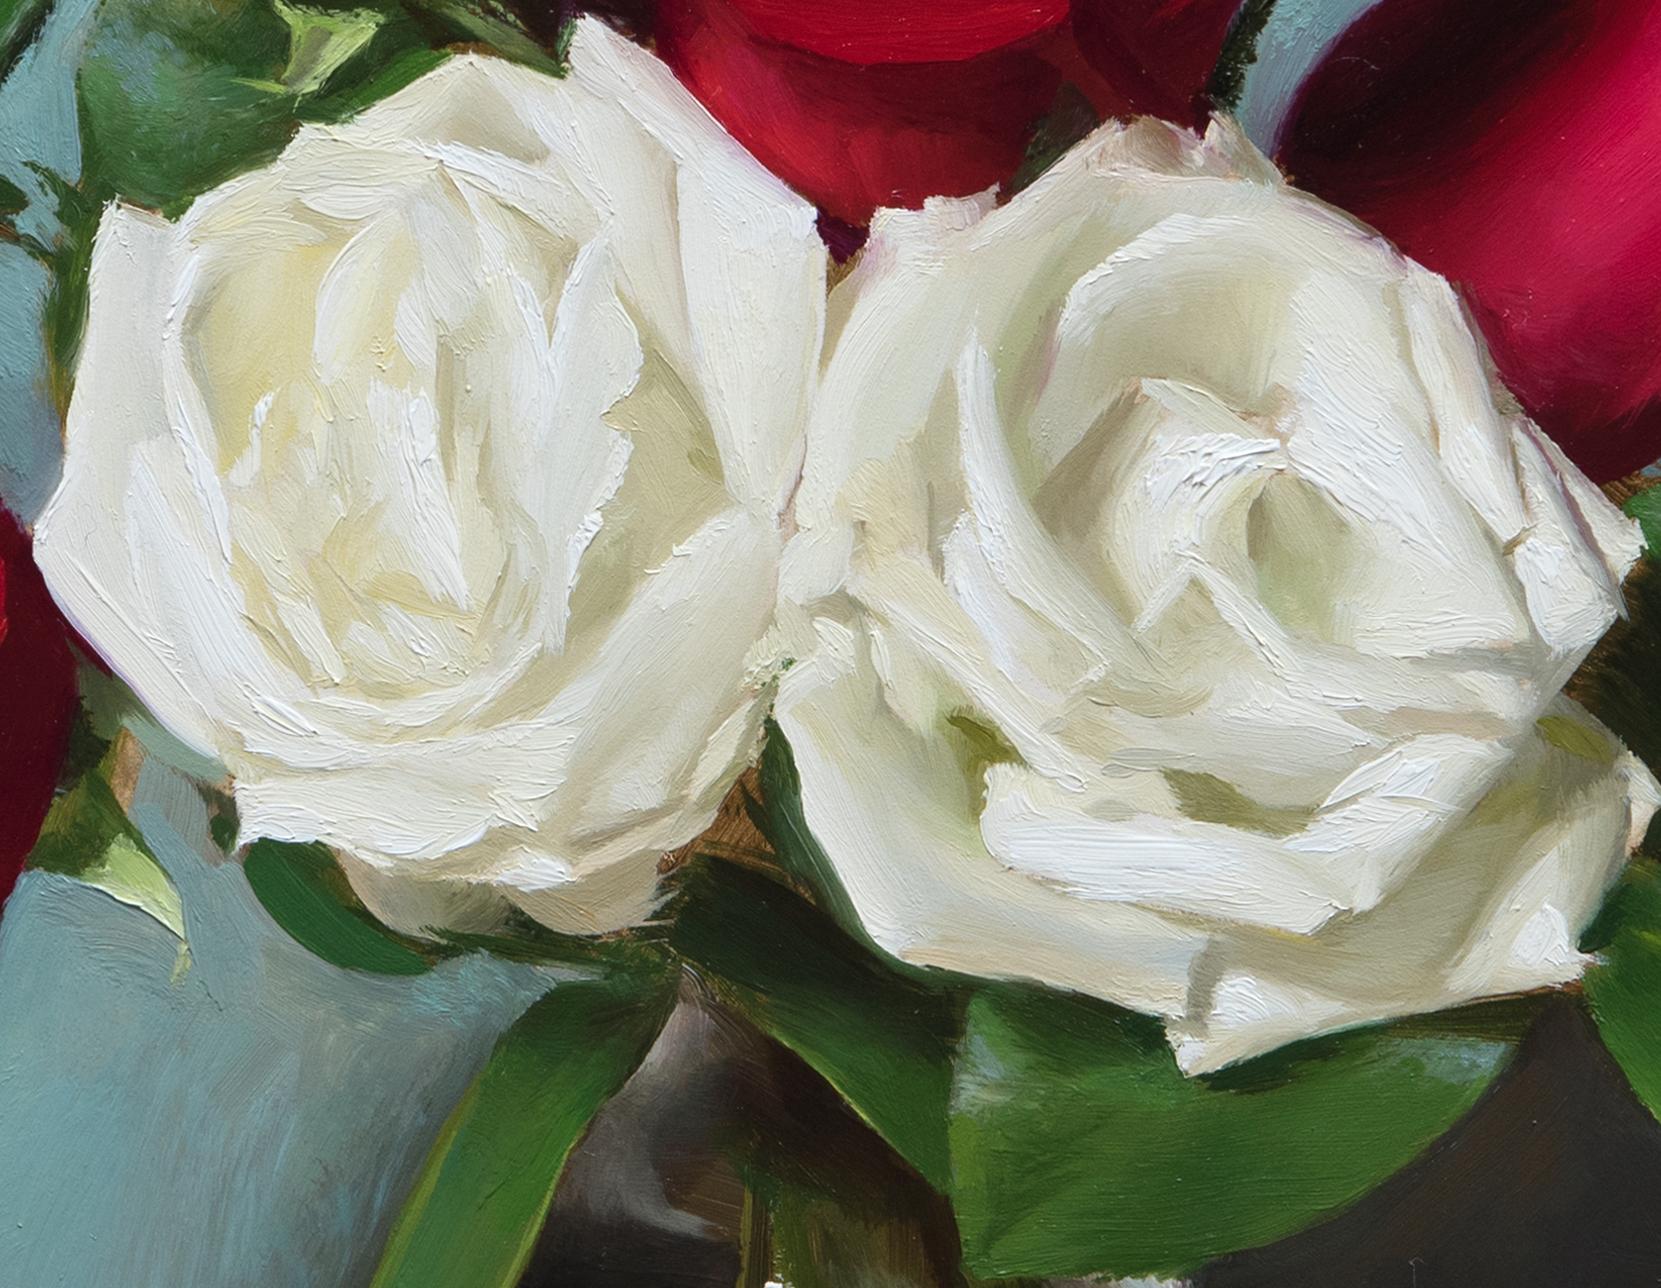 Realist still-life with red and white roses, 